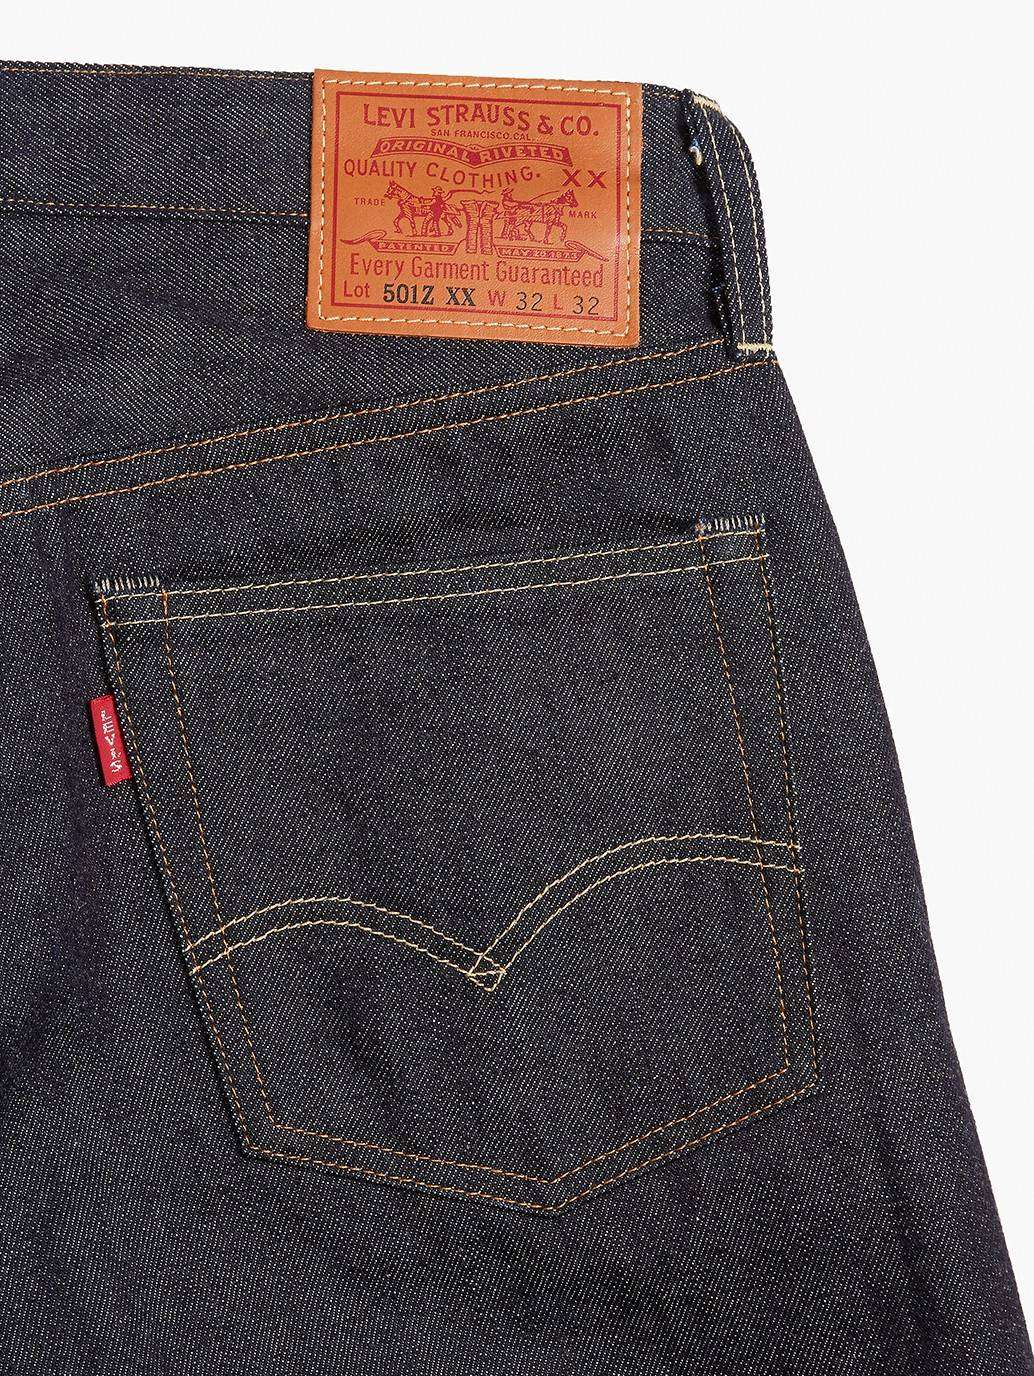 Buy 1954 501® Jeans | Levi's® Official Online Store MY